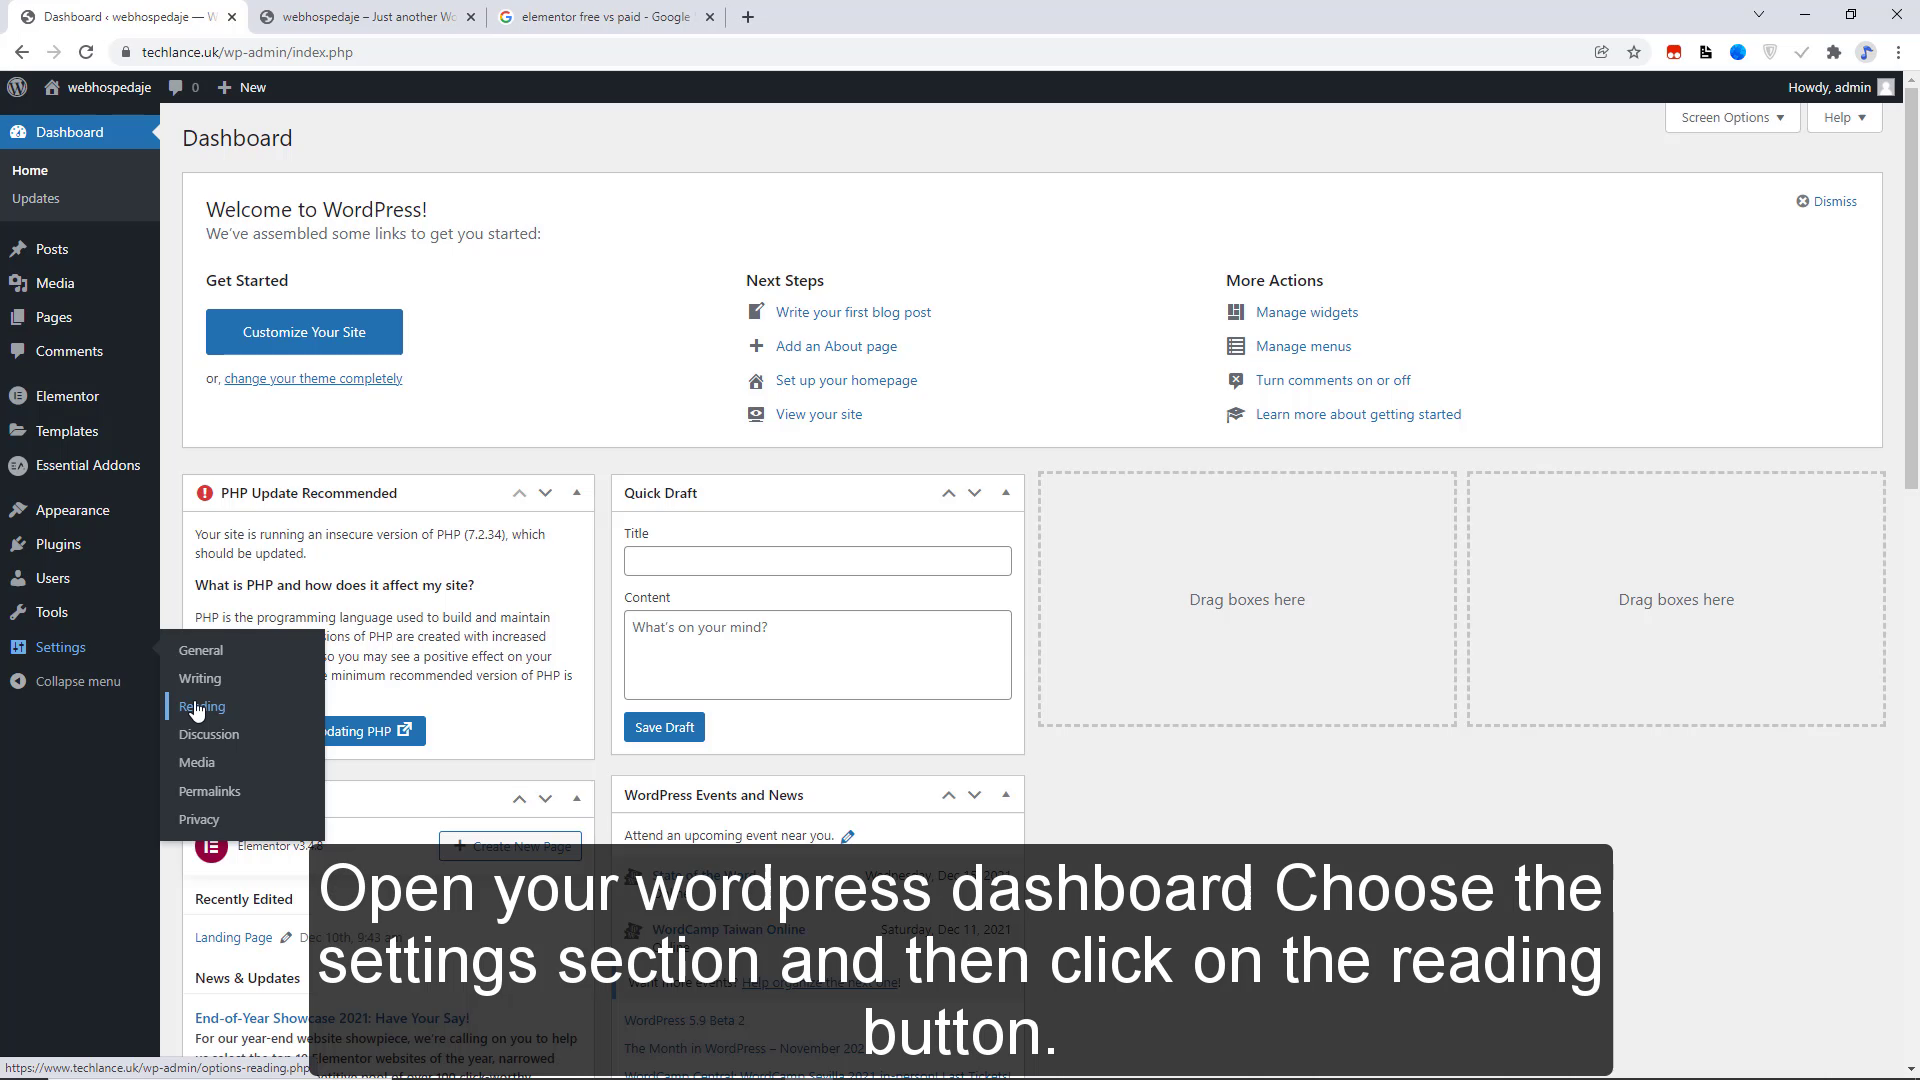 Open your wordpress dashboard Choose the settings section and then click on the reading button